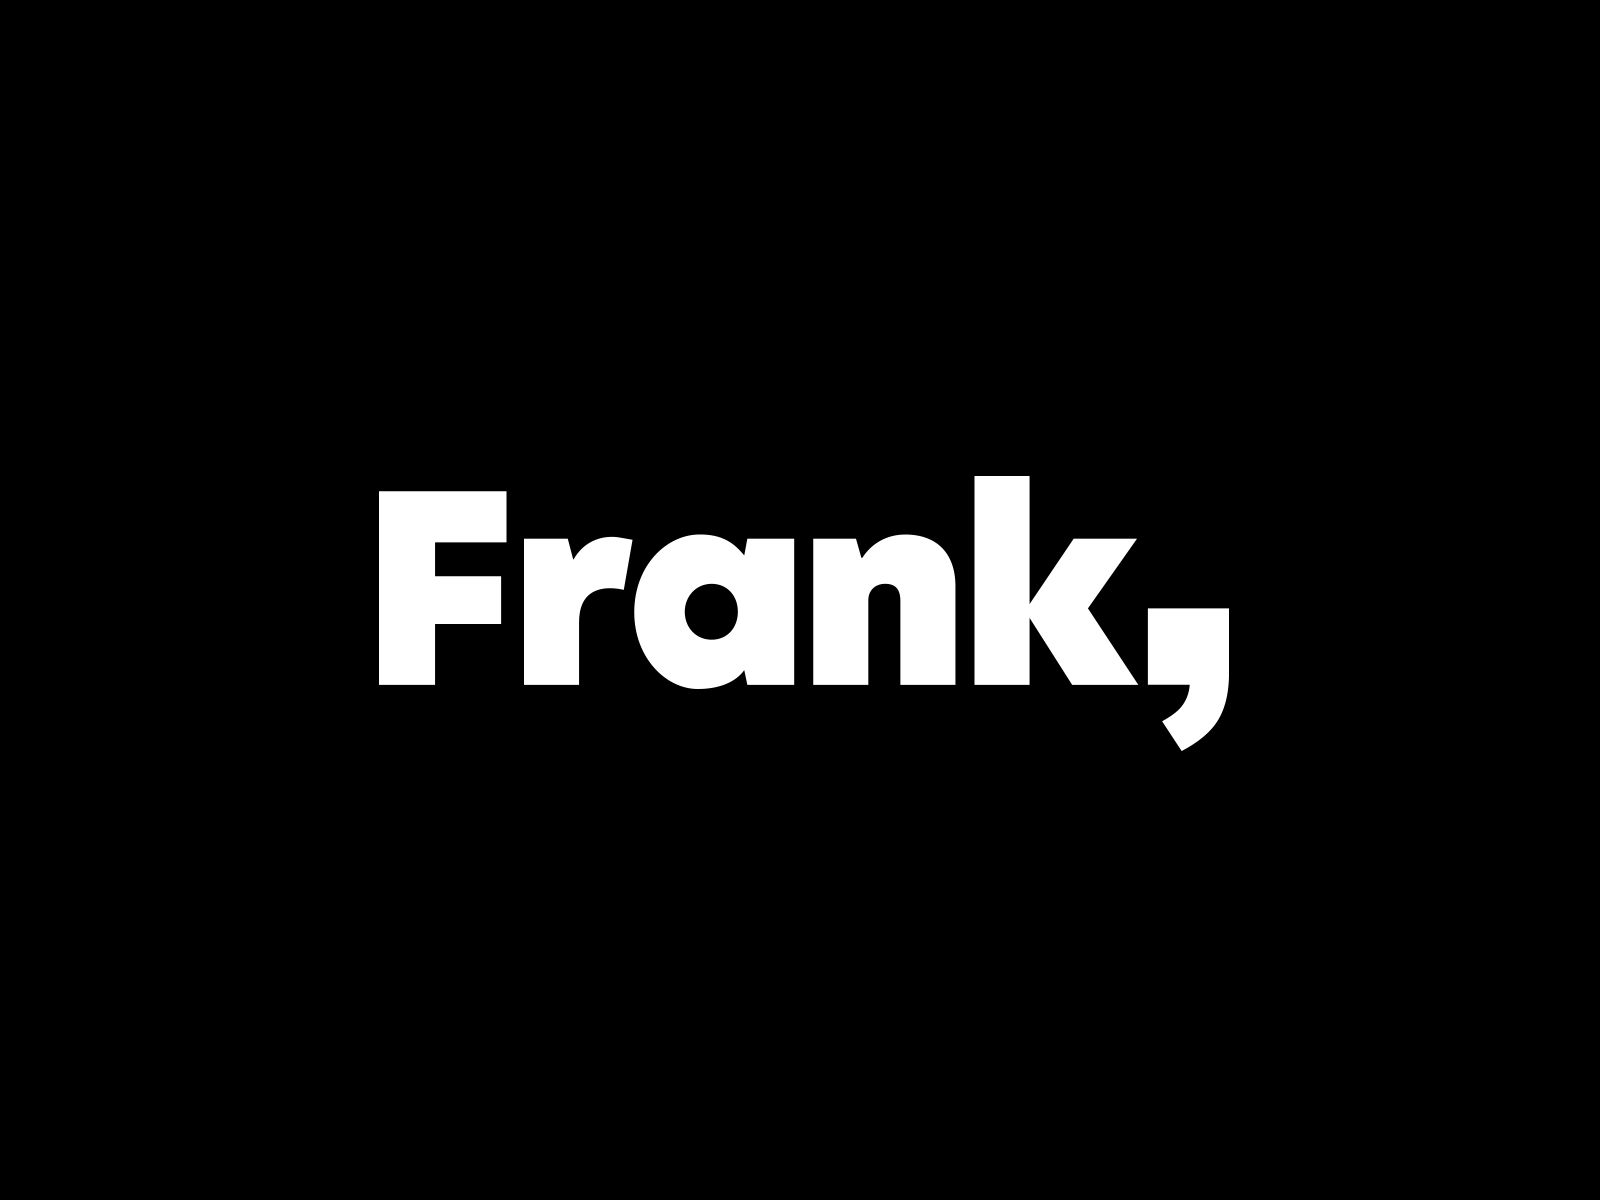 Frank Branding by Kyle Foundry on Dribbble